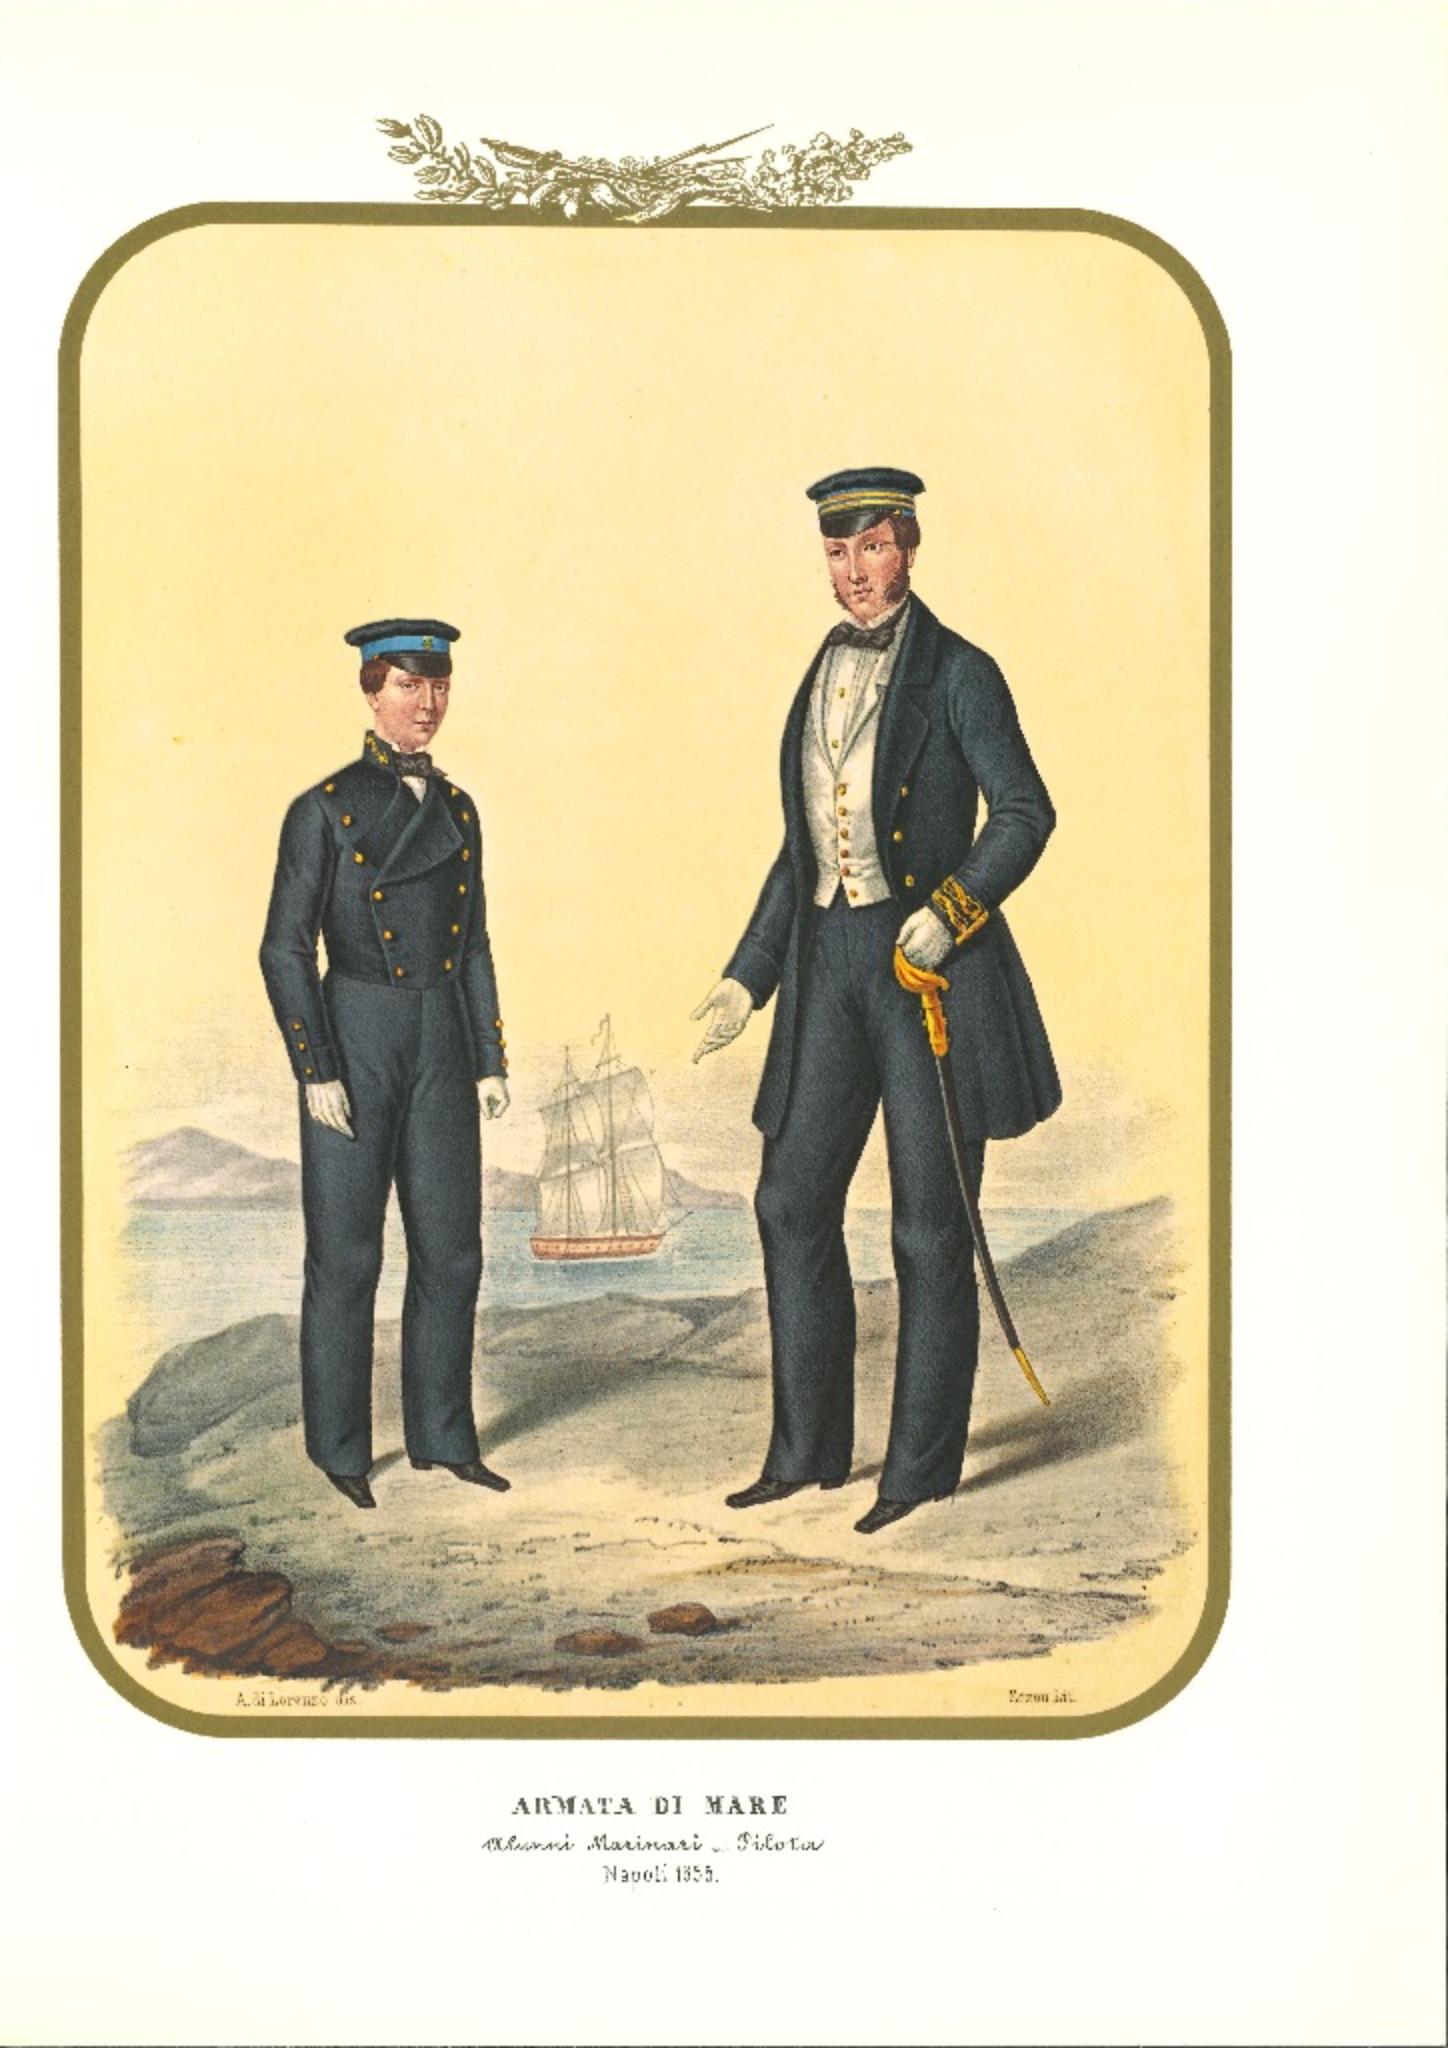 Navy: Seafaring Students is a lithograph by Antonio Zezon. Naples 1855.

Interesting colored lithograph which describes the Army of the Sea: in the lithograph there are a Seafaring Student and a Pilot.

In excellent condition, this print belongs to